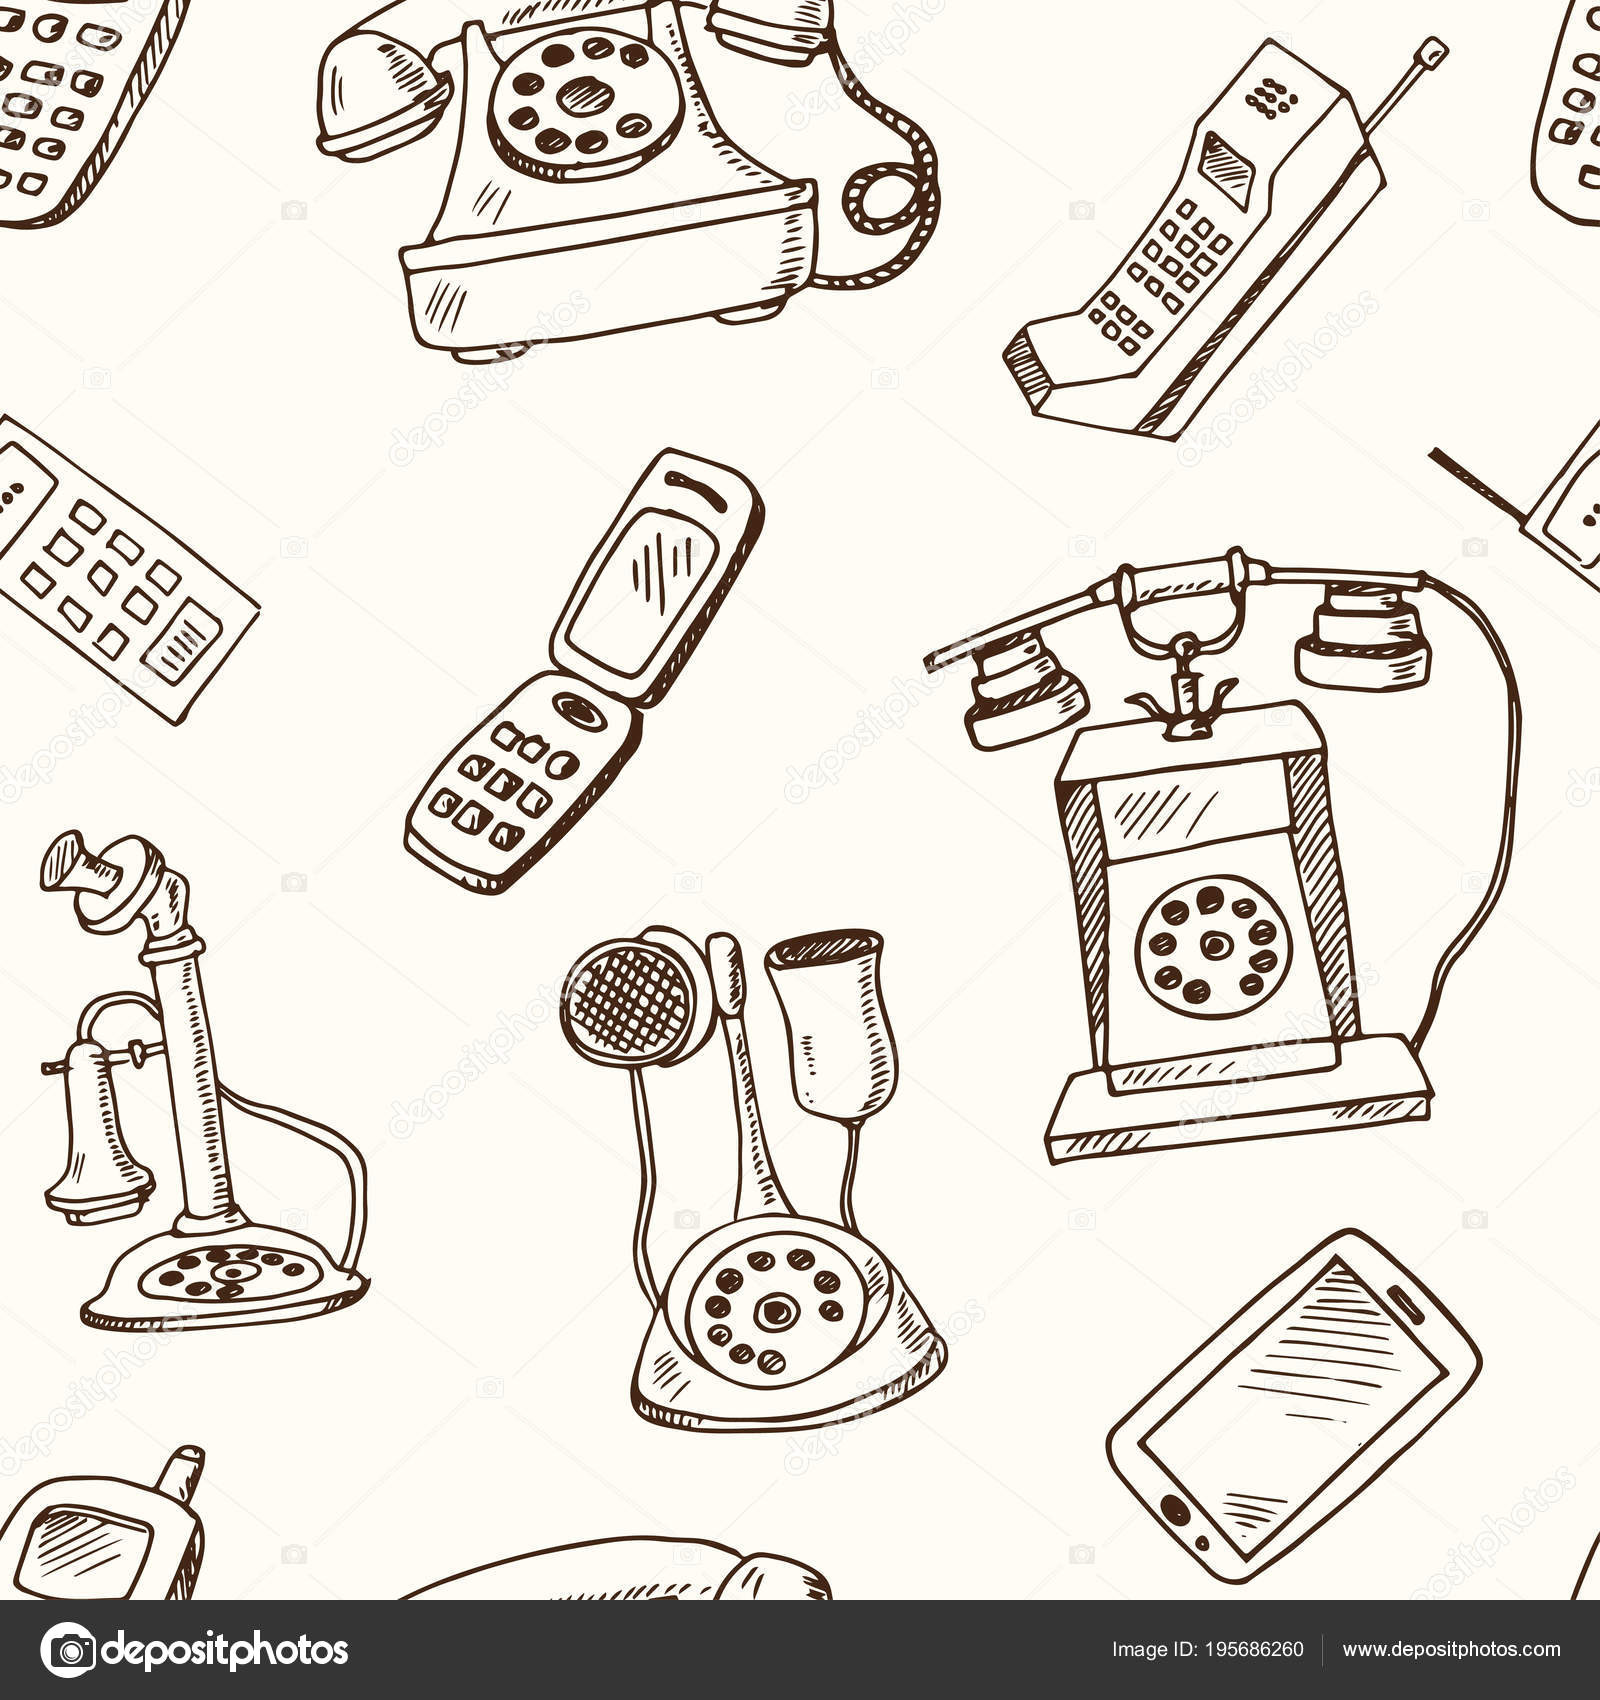 history of phones hand drawn doodle seamless pattern sketches vector illustration for design and packages product symbol collection